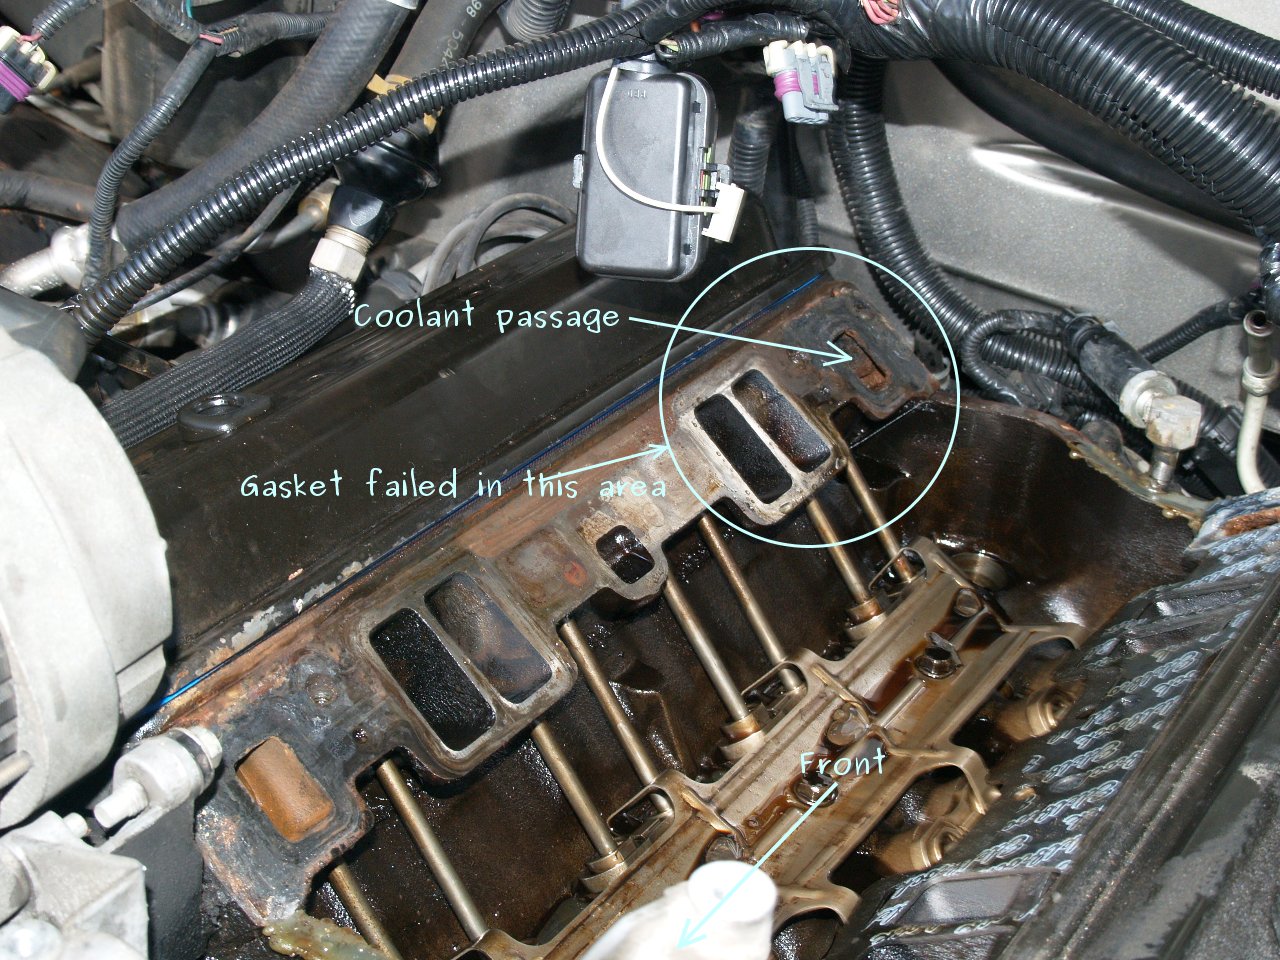 See P0922 in engine